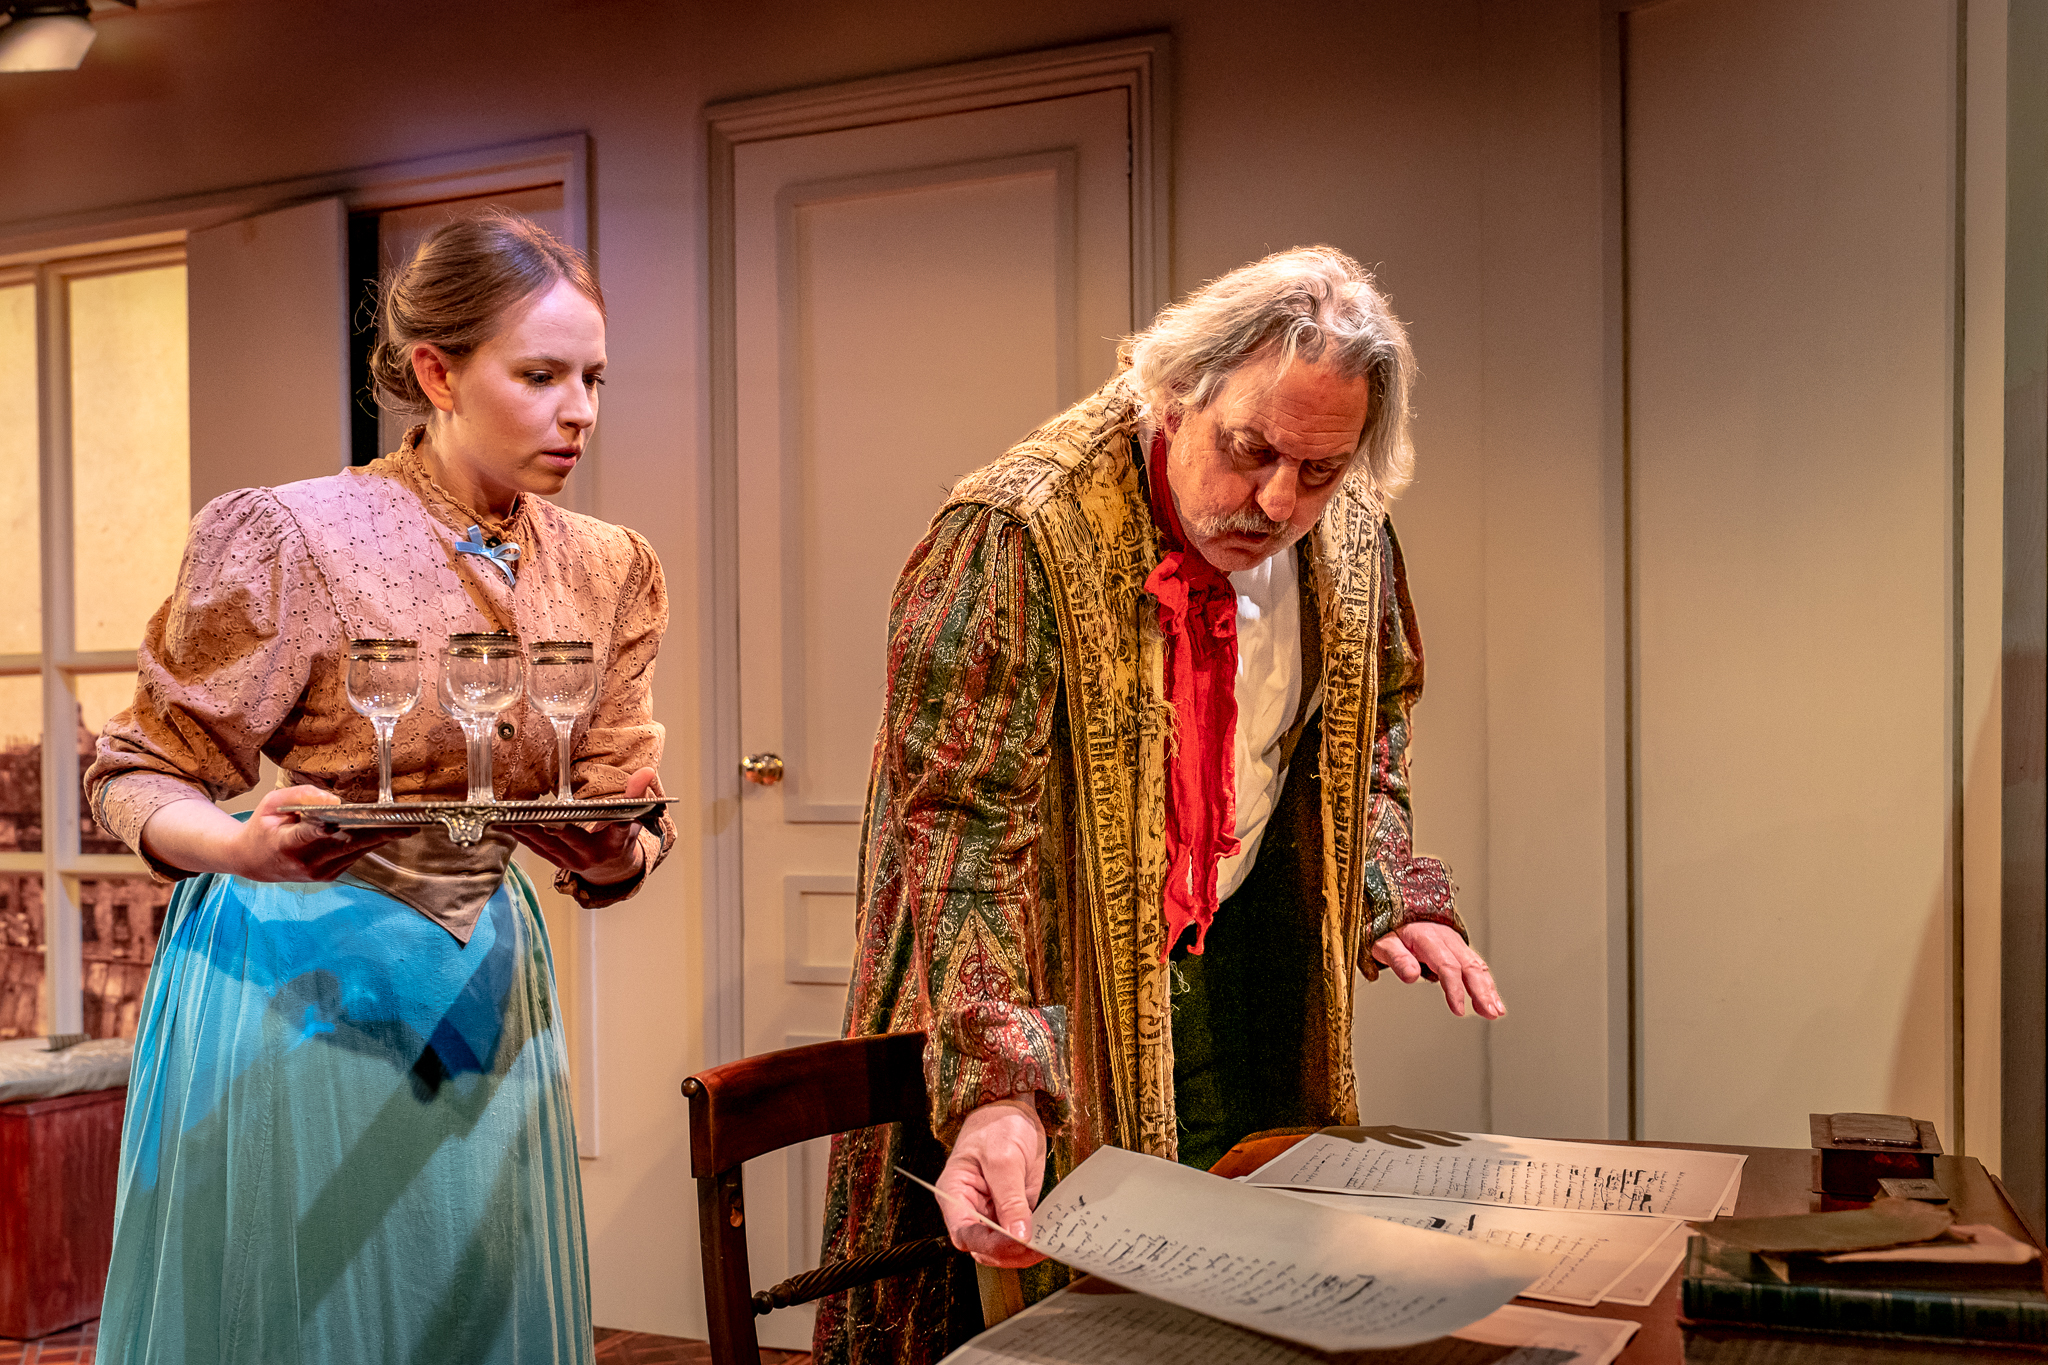 Rosalind-Lailey-and-Bob-Barrett-in-The-Oyster-Problem-at-Jermyn-Street-Theatre.-Photo-by-Steve-Gregson.jpg